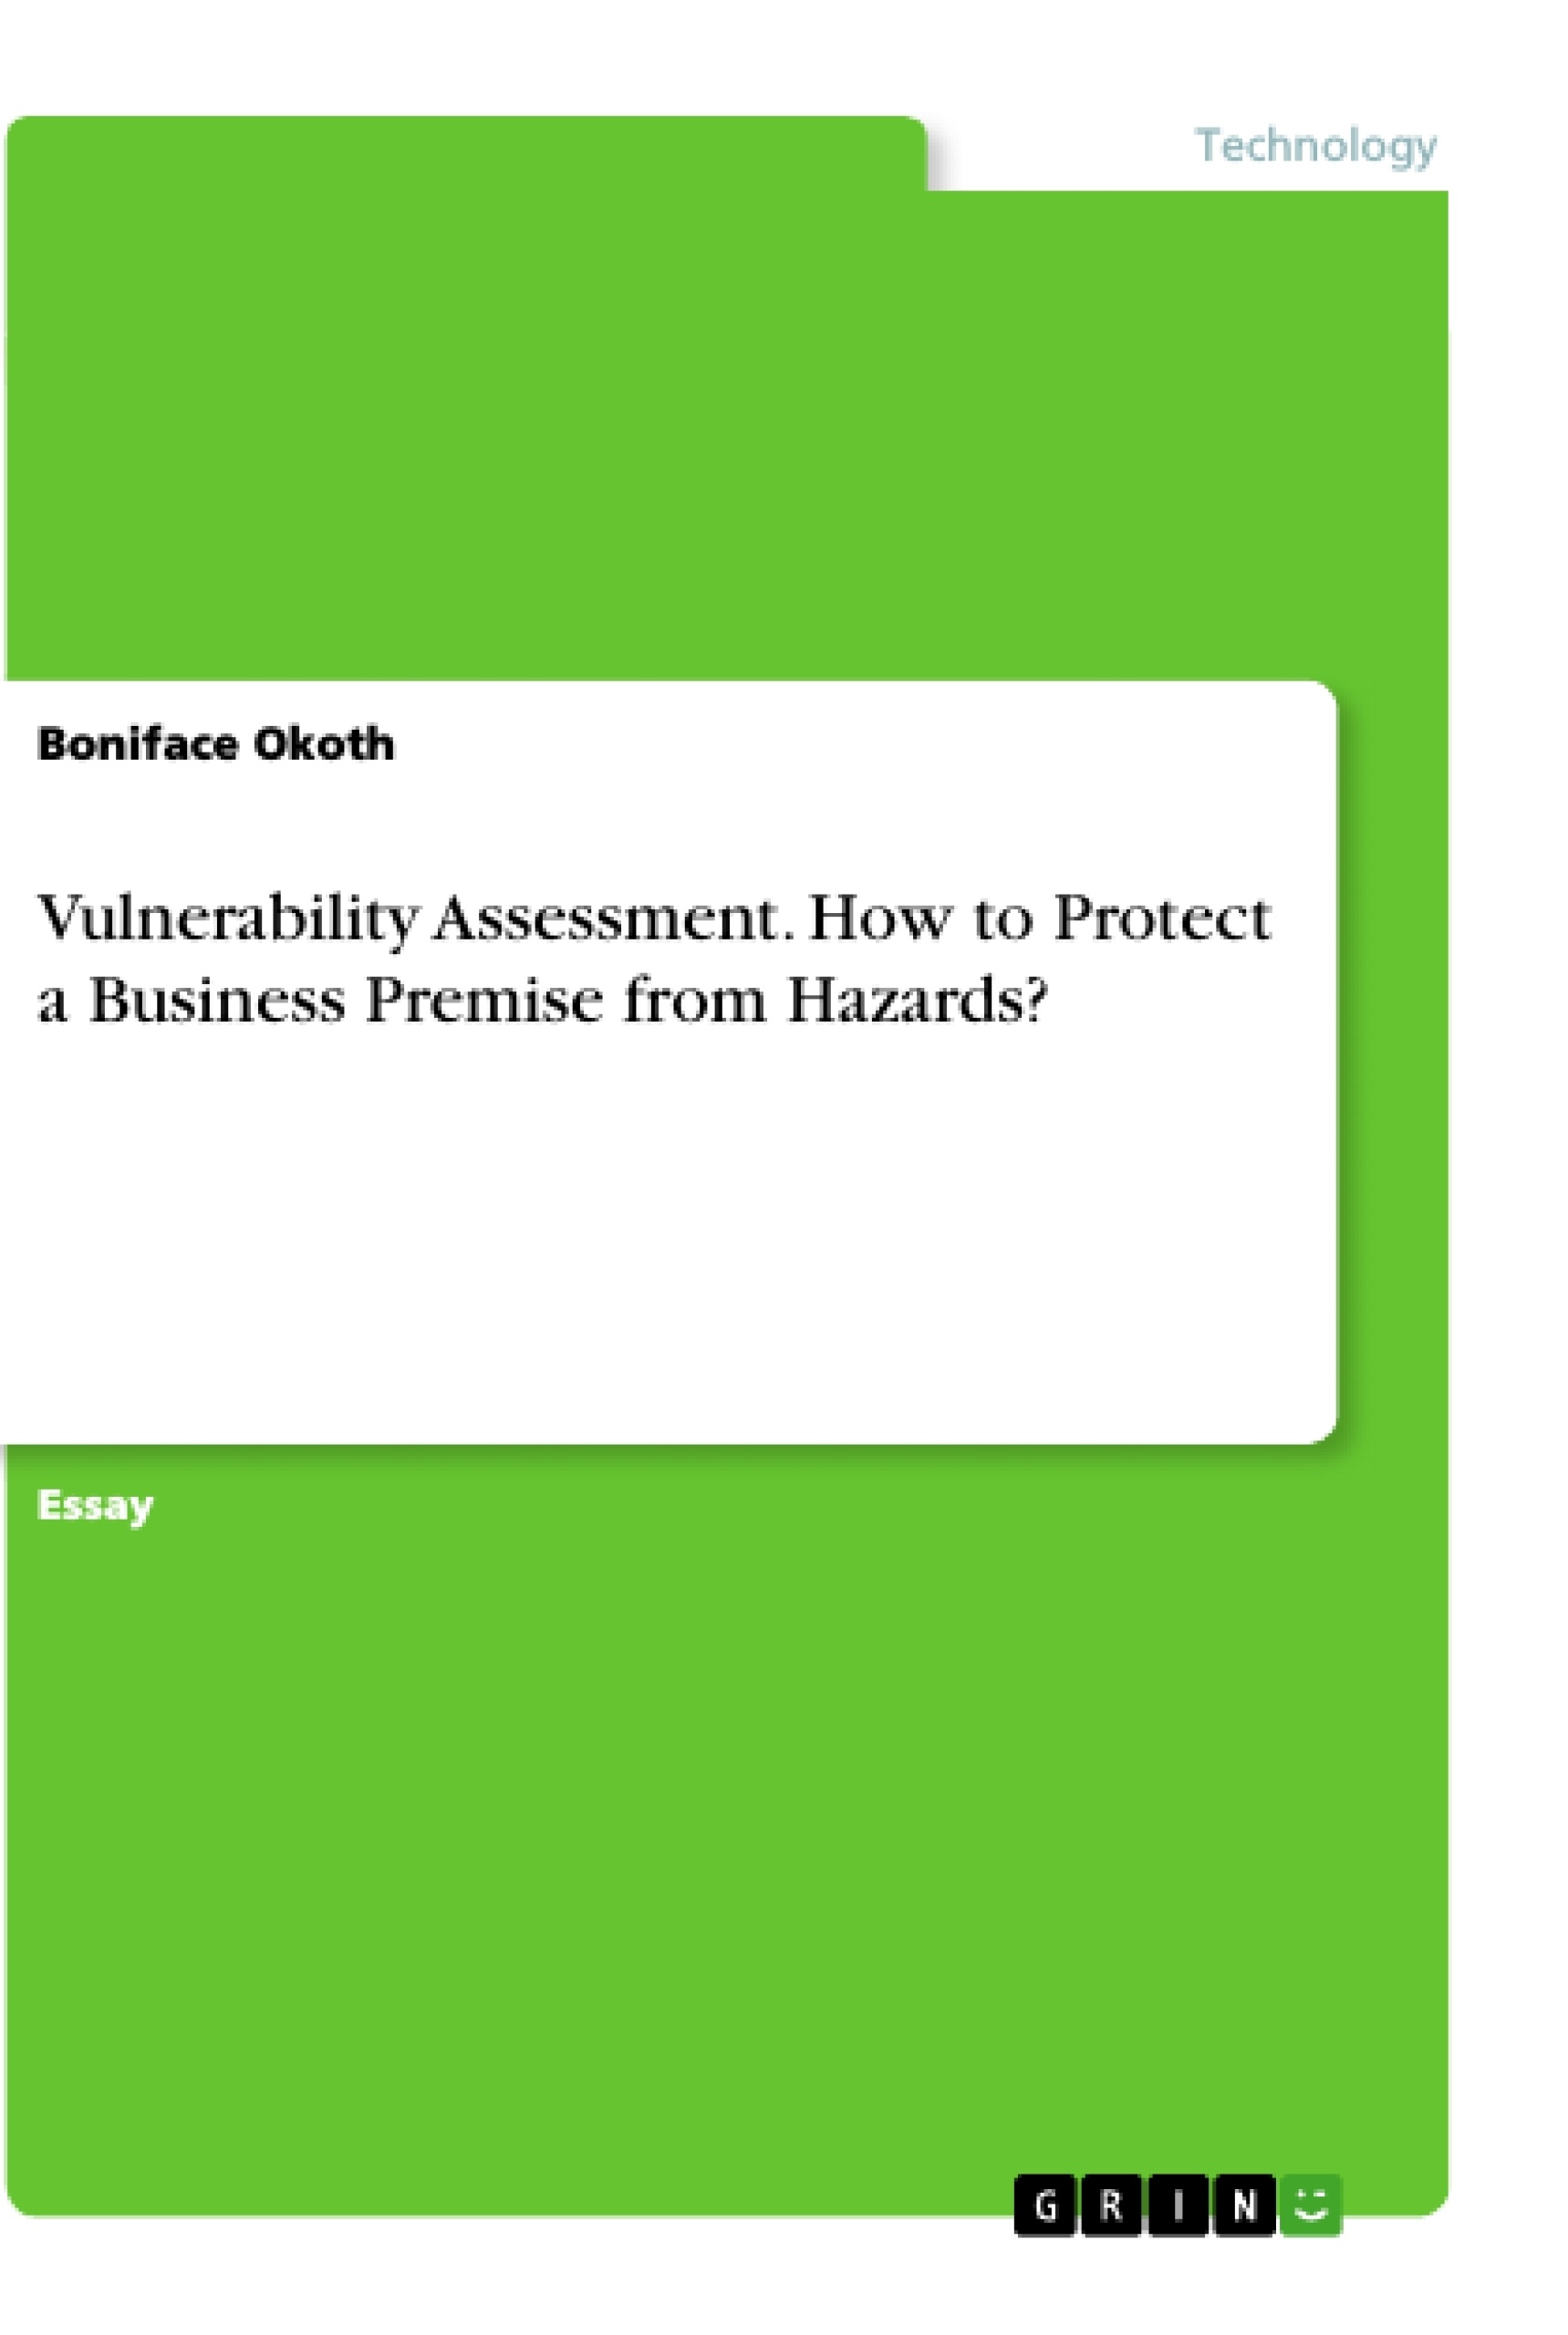 Titel: Vulnerability Assessment. How to Protect a Business Premise from Hazards?